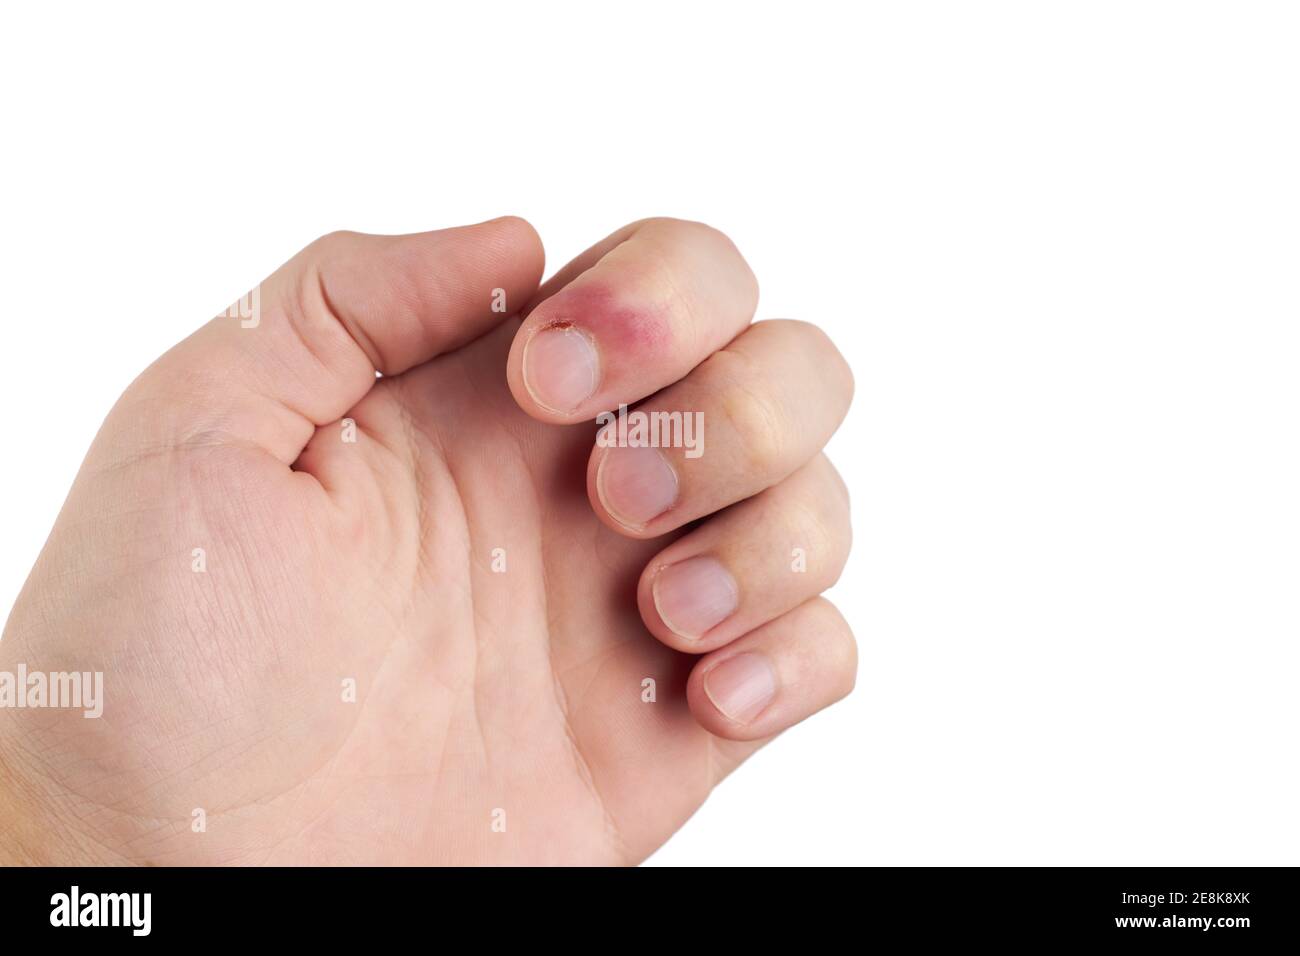 person with finger infection disease. fingernail pain. isolated on white background. copy space Stock Photo